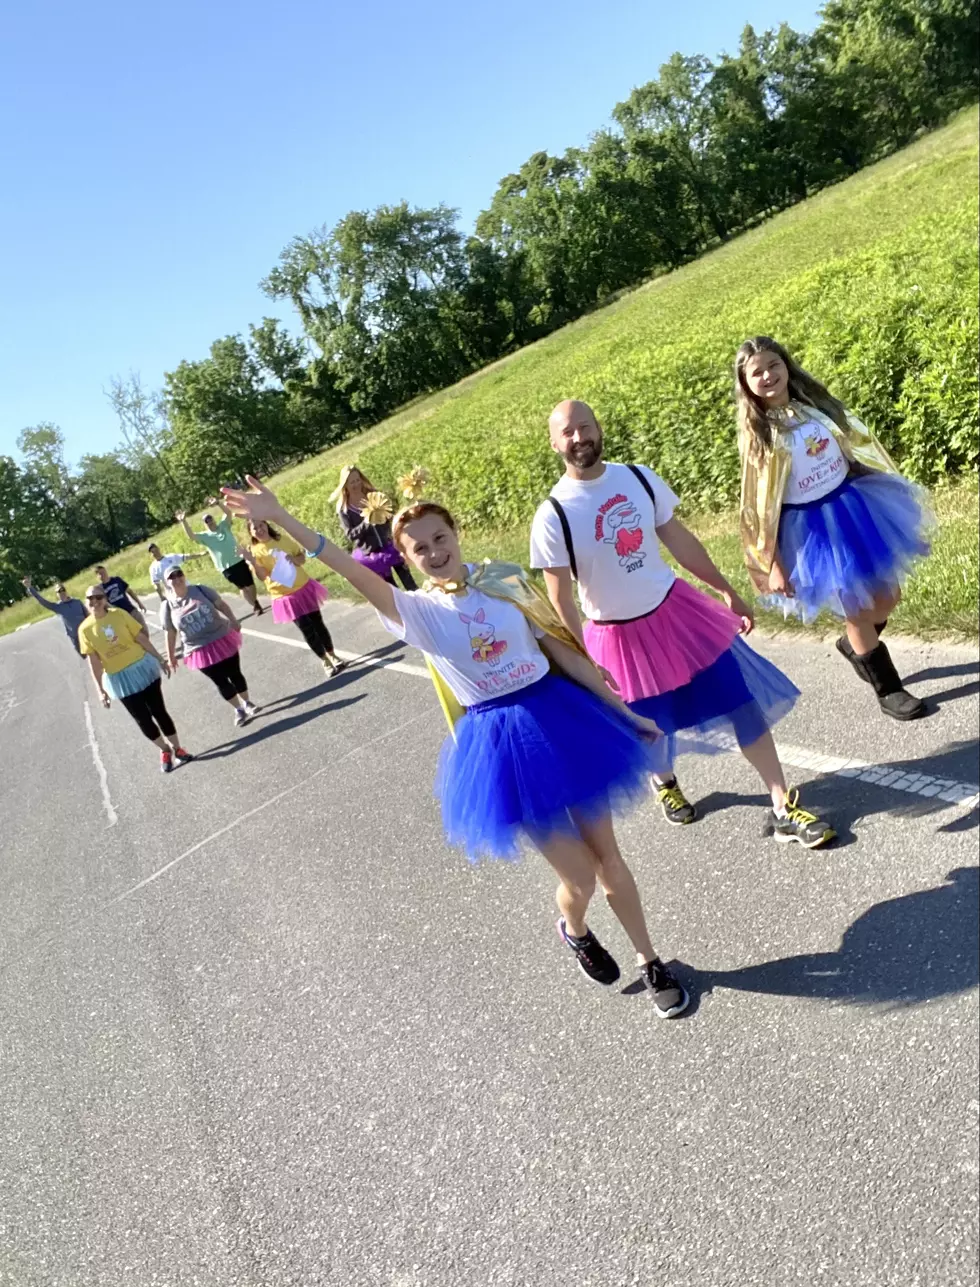 Get your Tutu&#8217;s! Middletown, NJ non-profit holding 5K to raise funds for pediatric cancer research